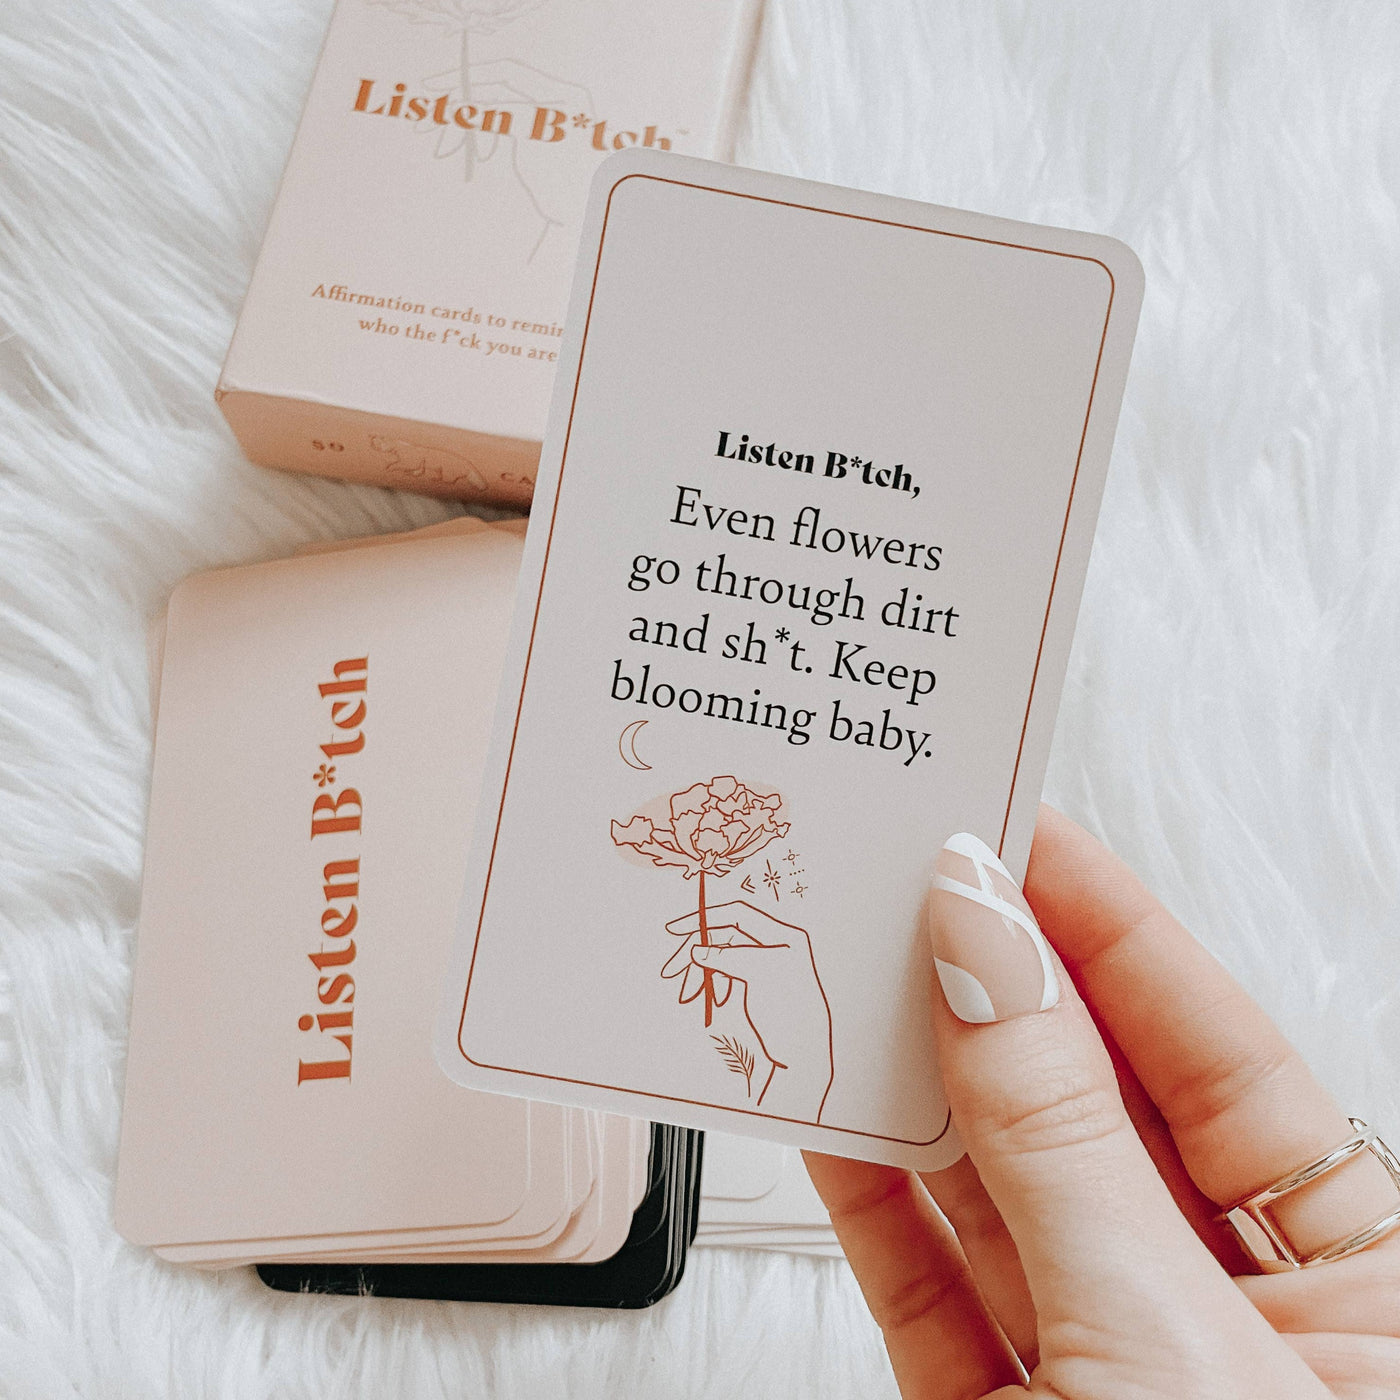 Listen Bitch | Affirmations Cards, The Local Space, Local Canadian Brands